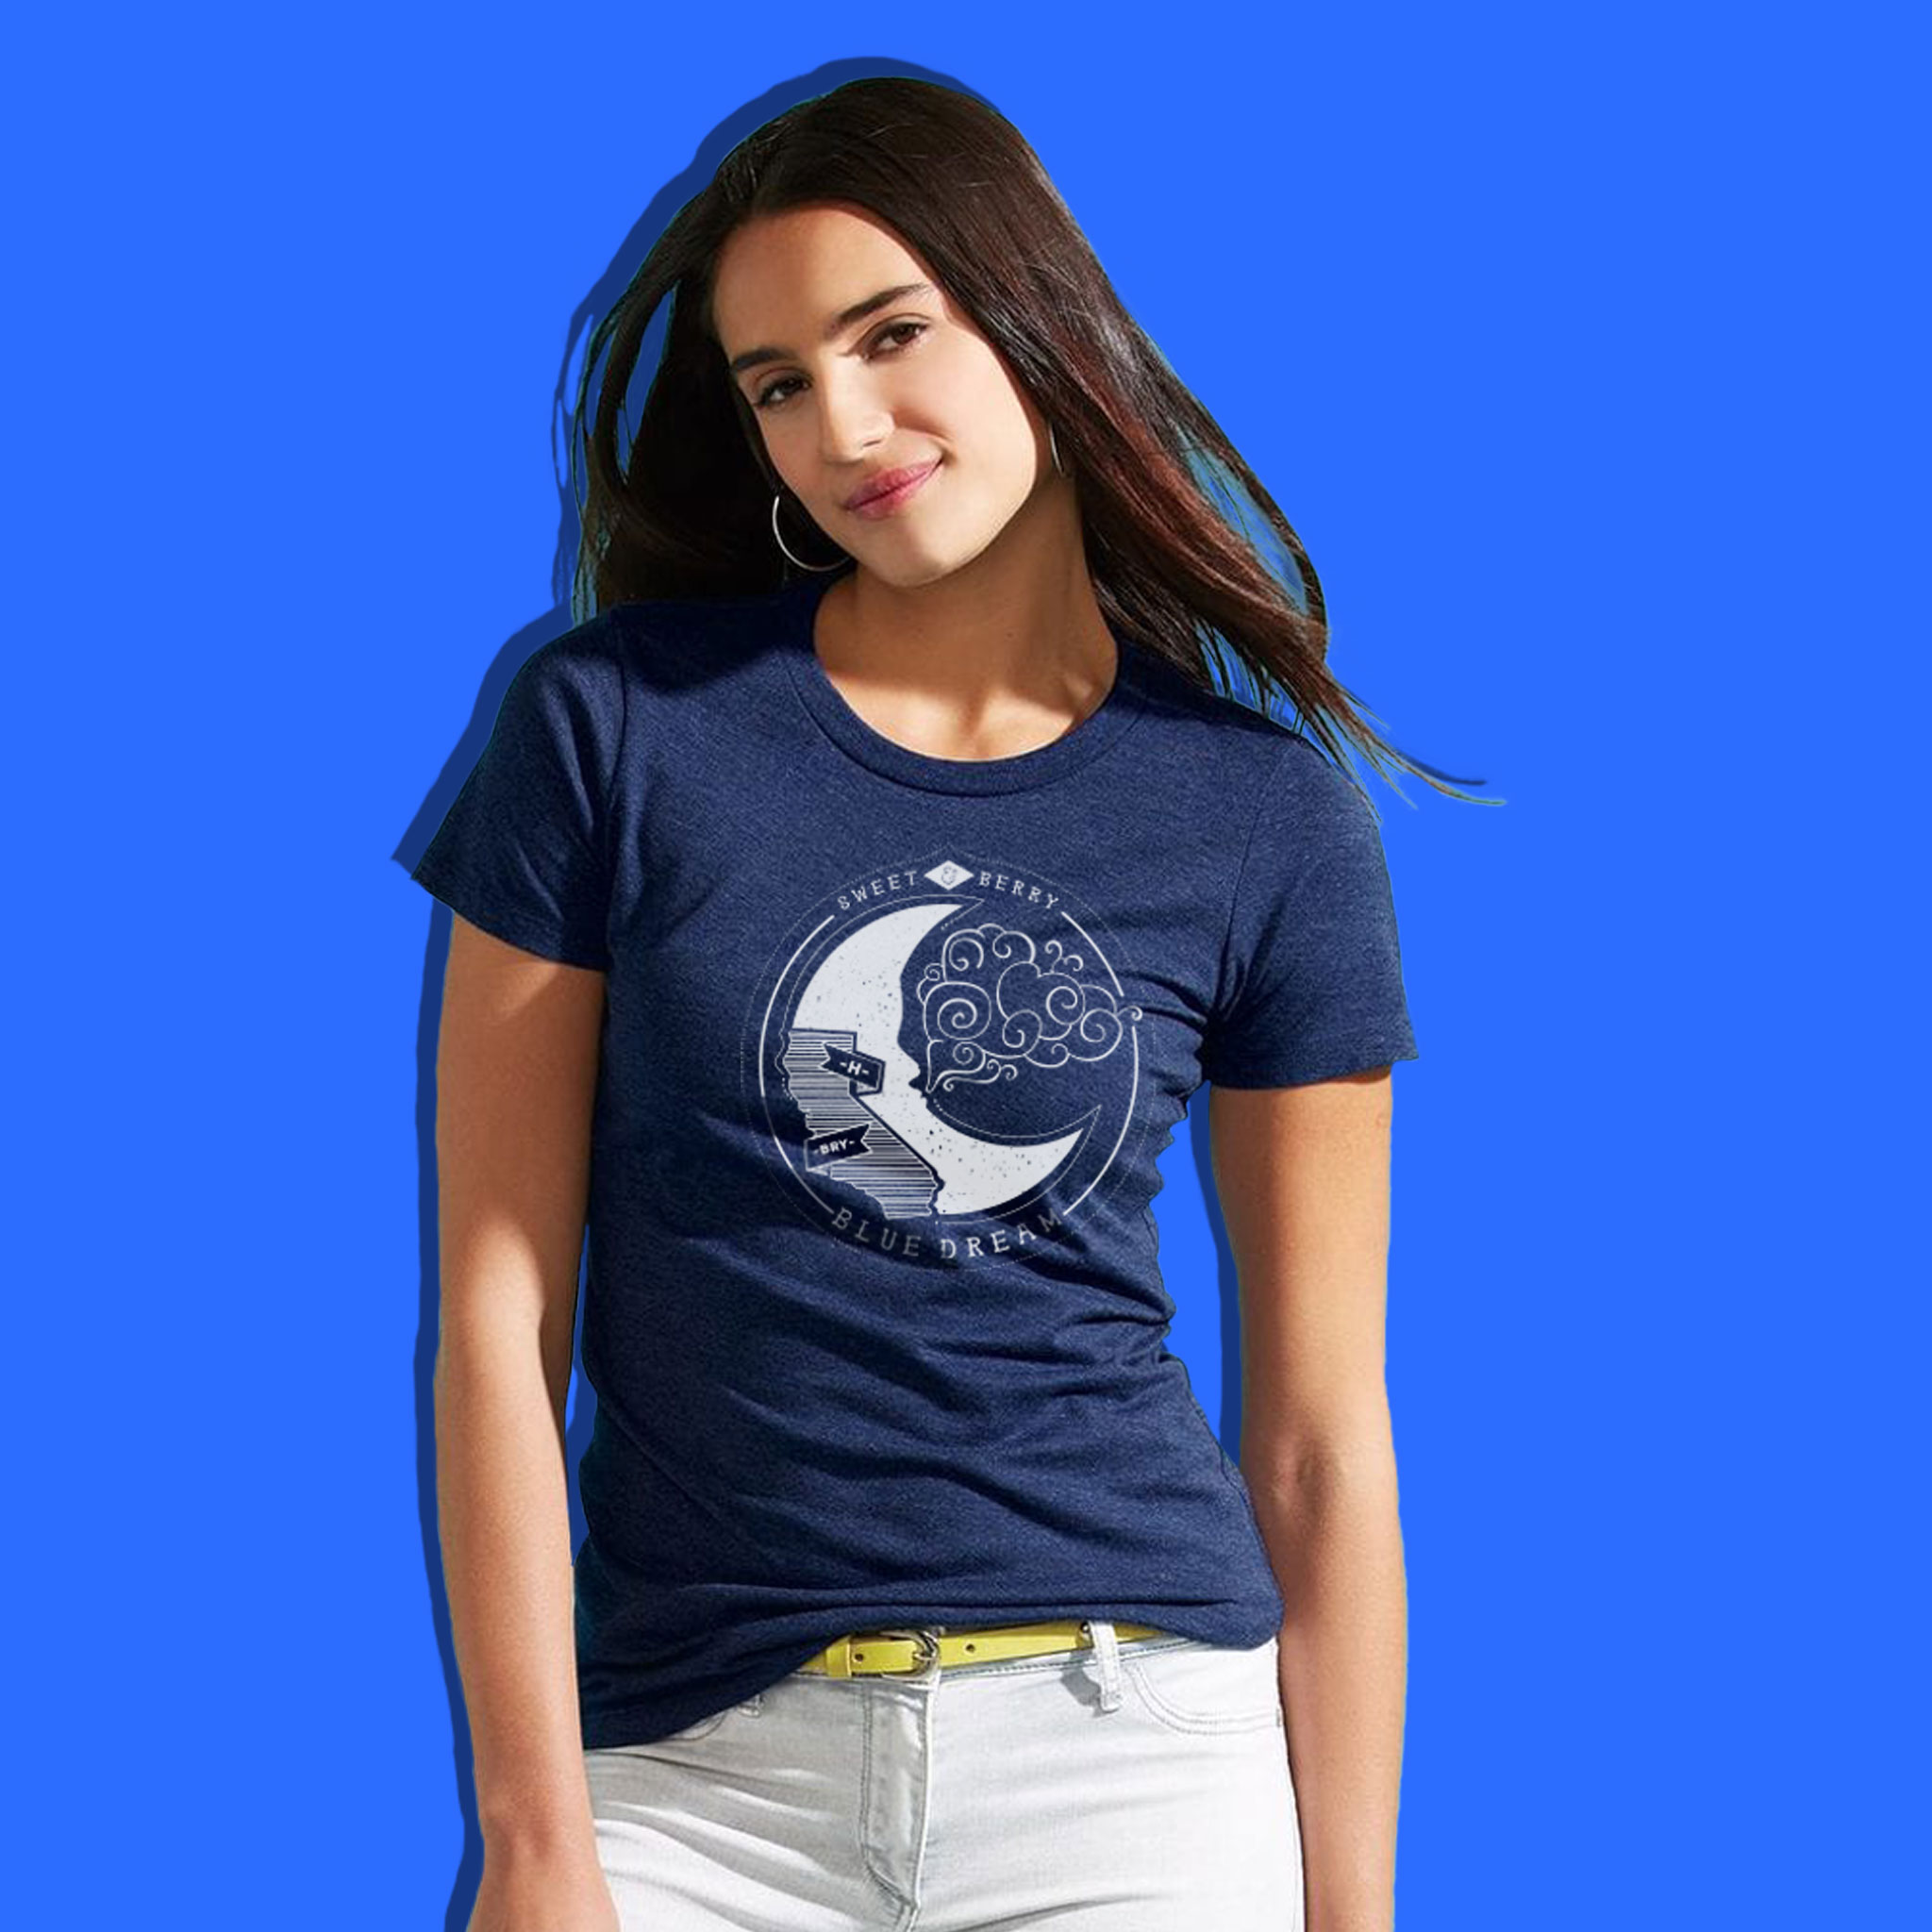 Blue Dream – Women’s Fitted Tee